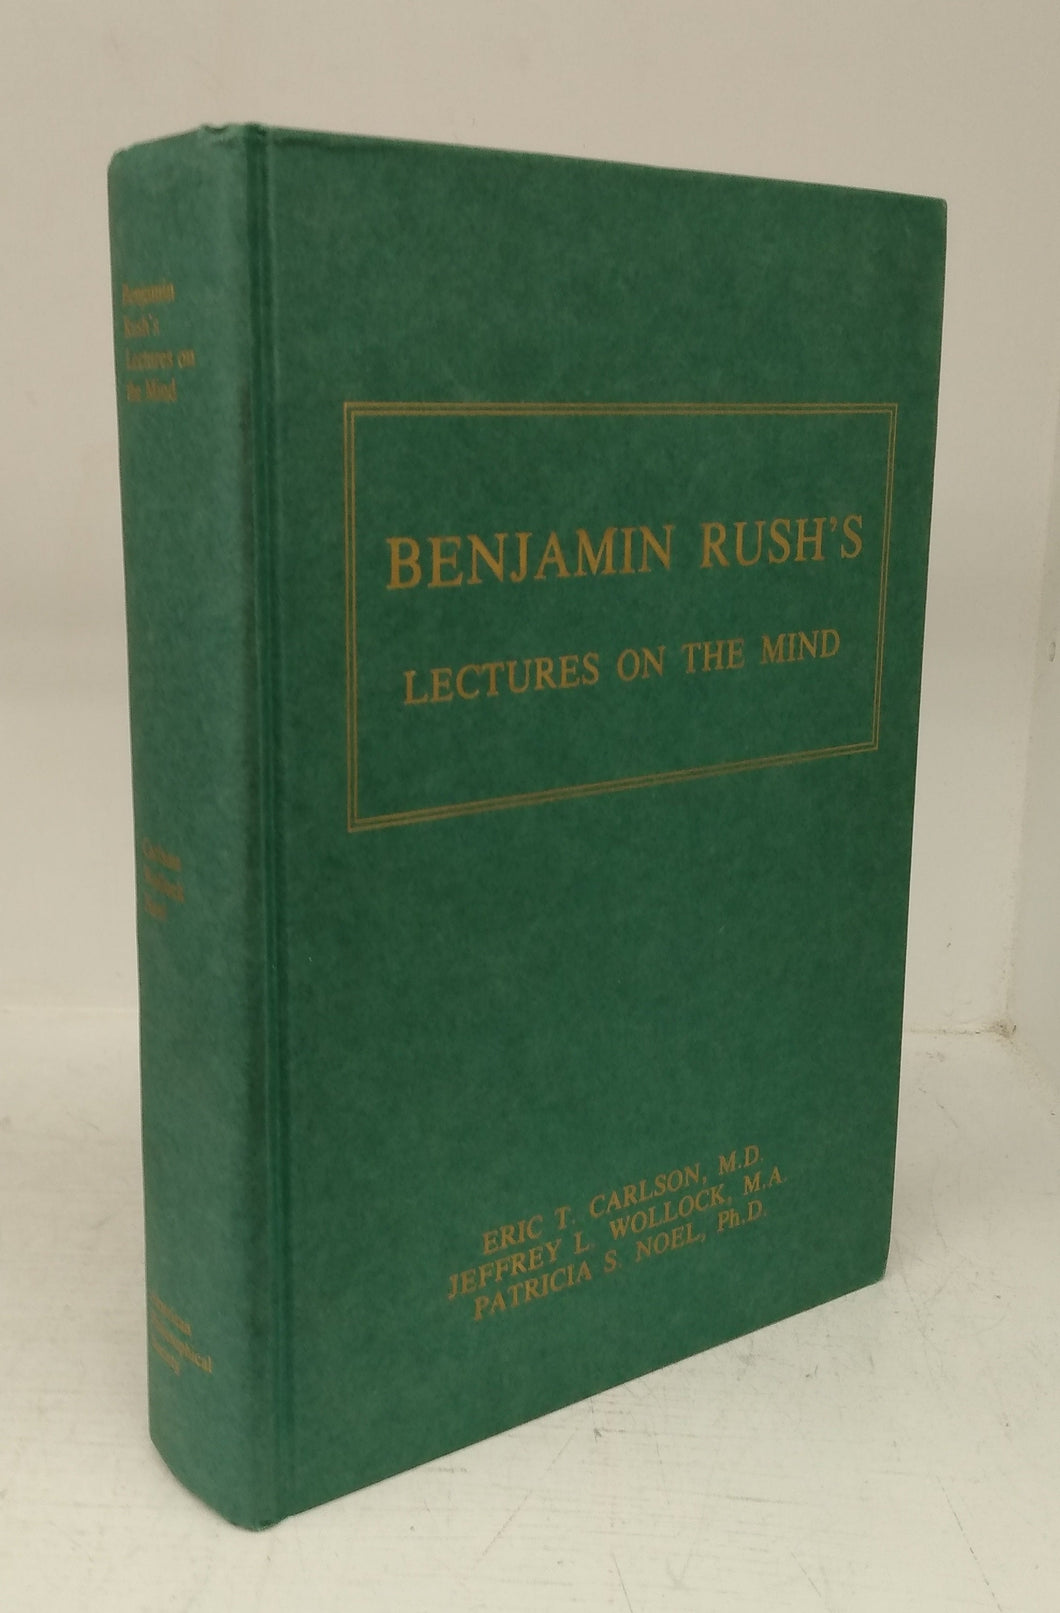 Benjamin Rush's Lectures on the Mind